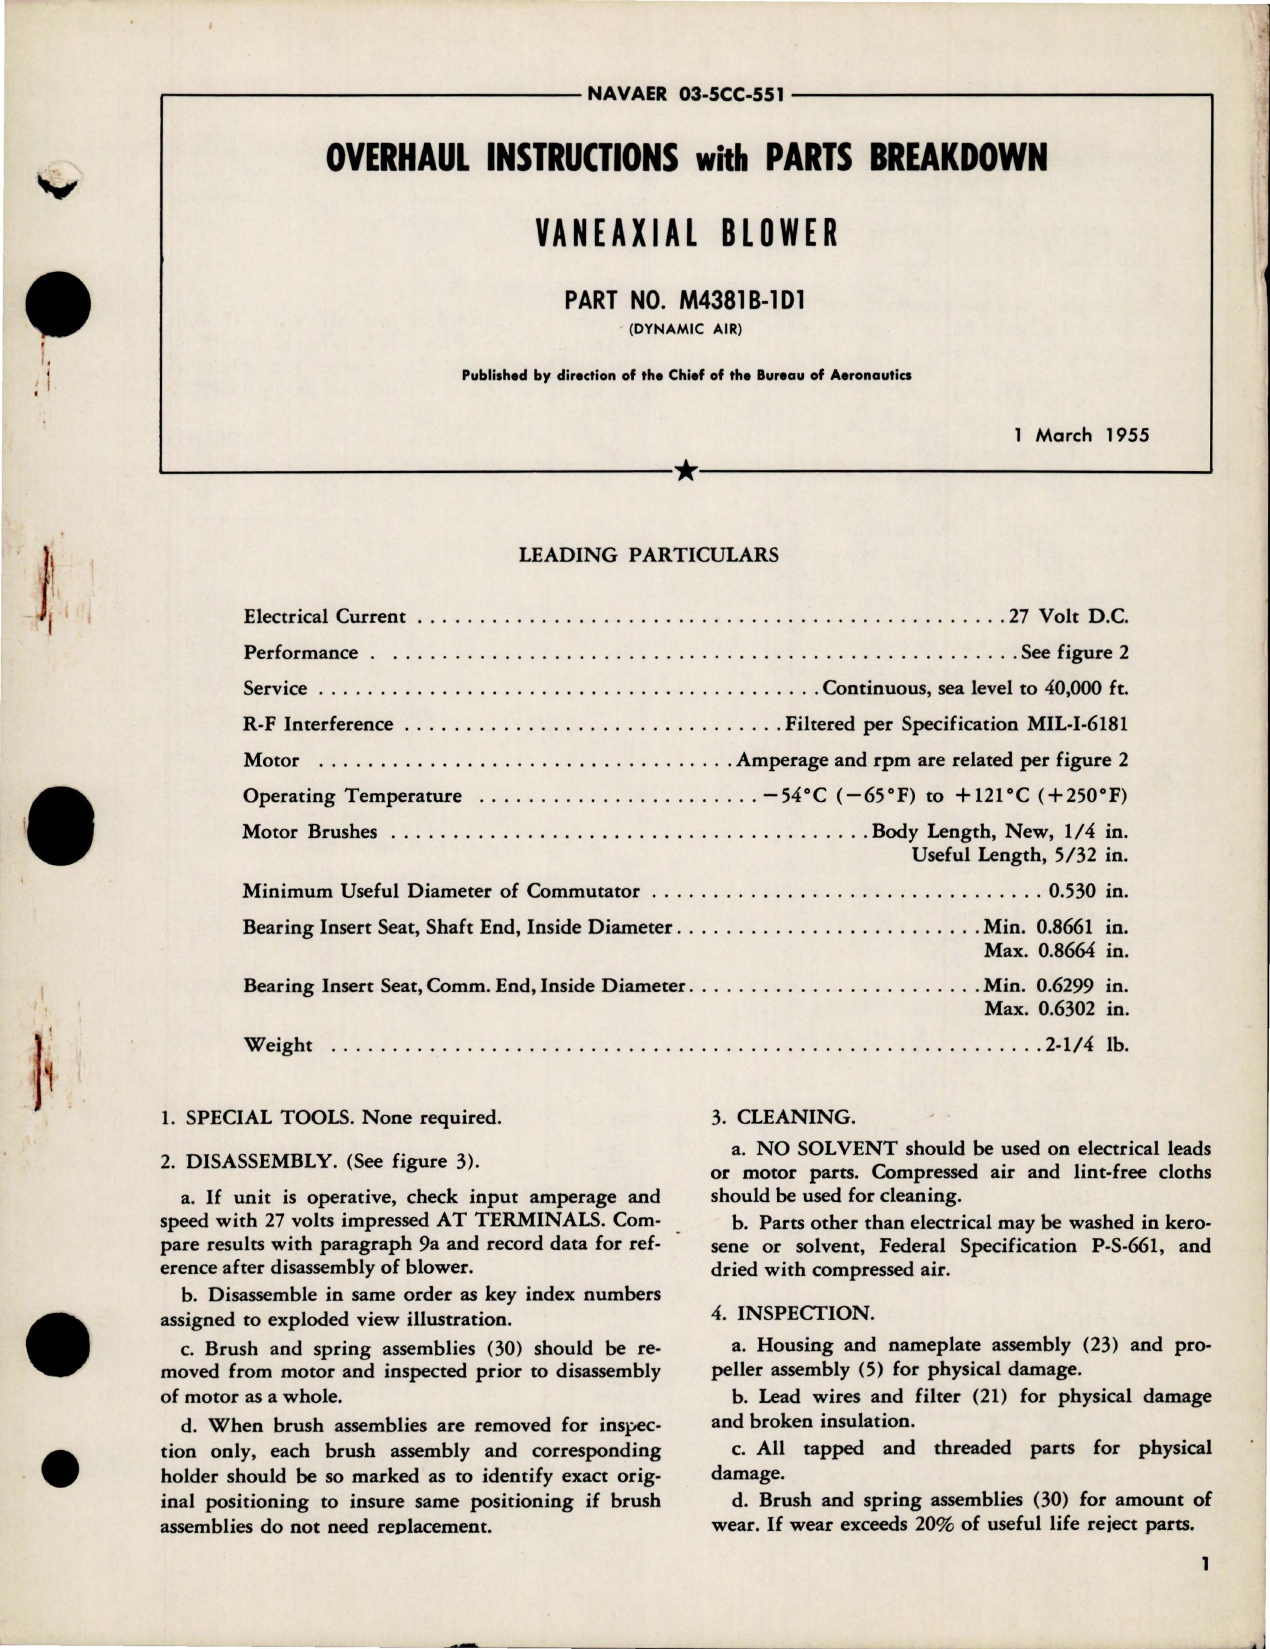 Sample page 1 from AirCorps Library document: Overhaul Instructions with Parts Breakdown for Vaneaxial Blower - Part M4381B-1D1